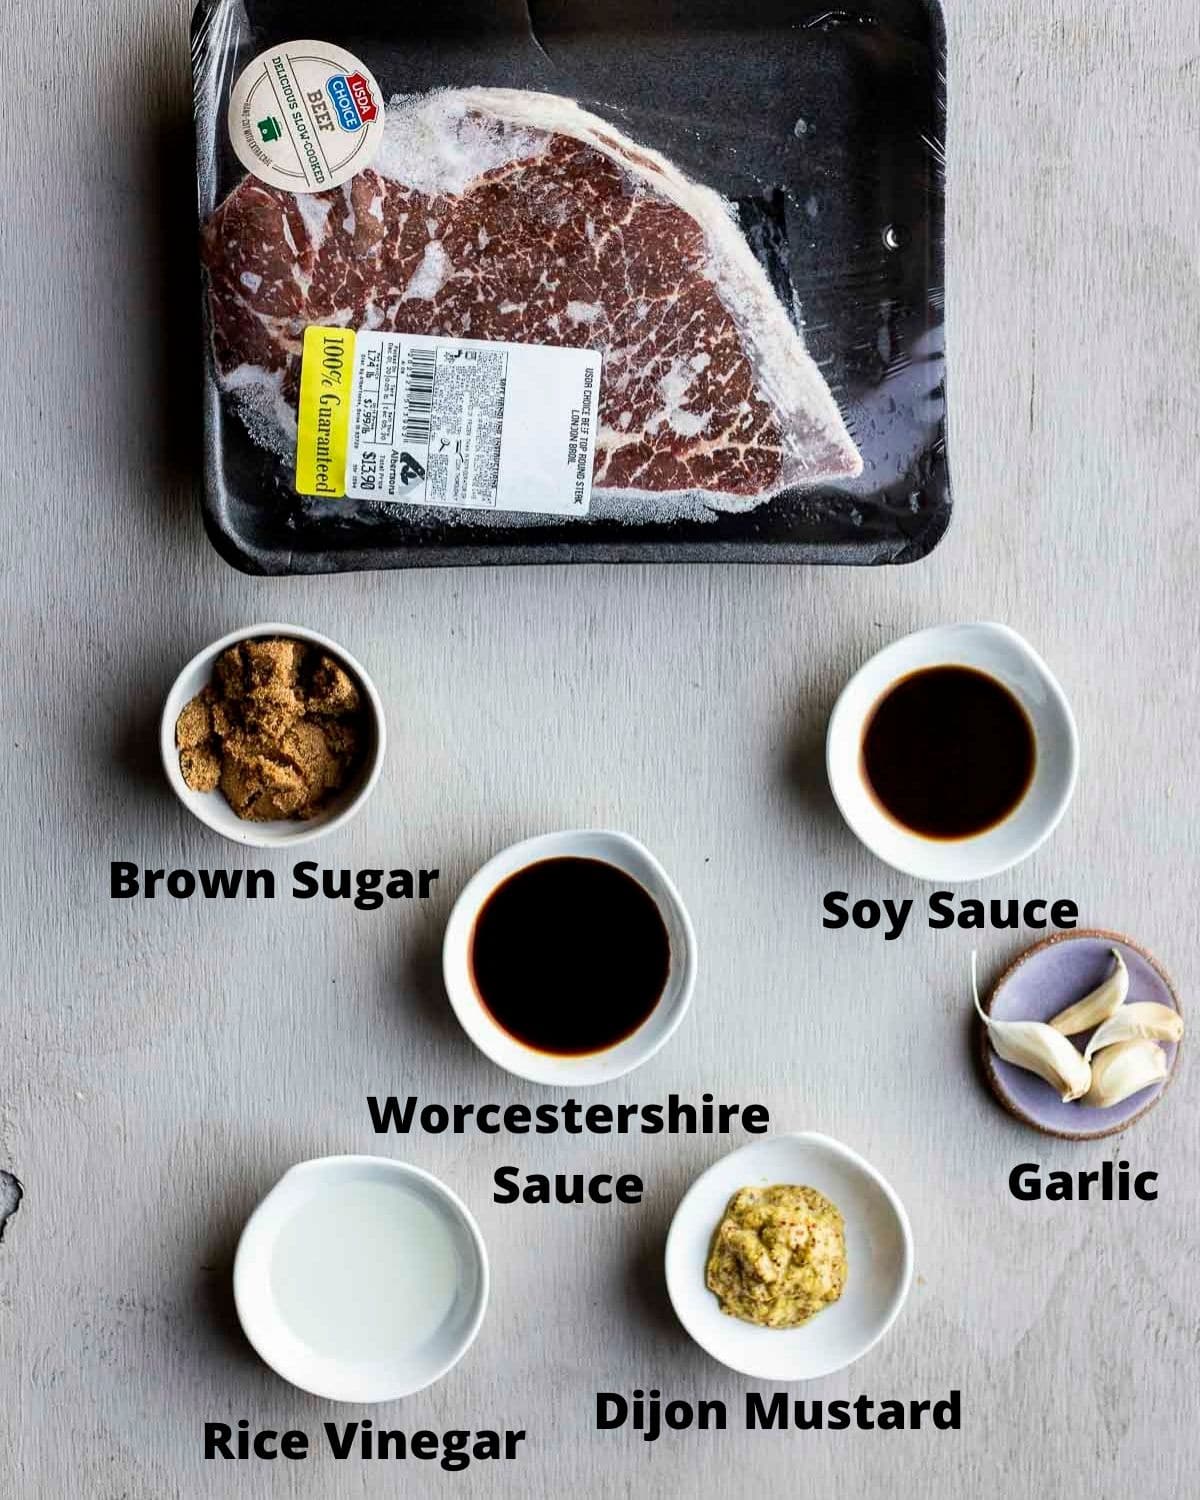 Ingredients to make sous vide London broil arranged individually and labelled.